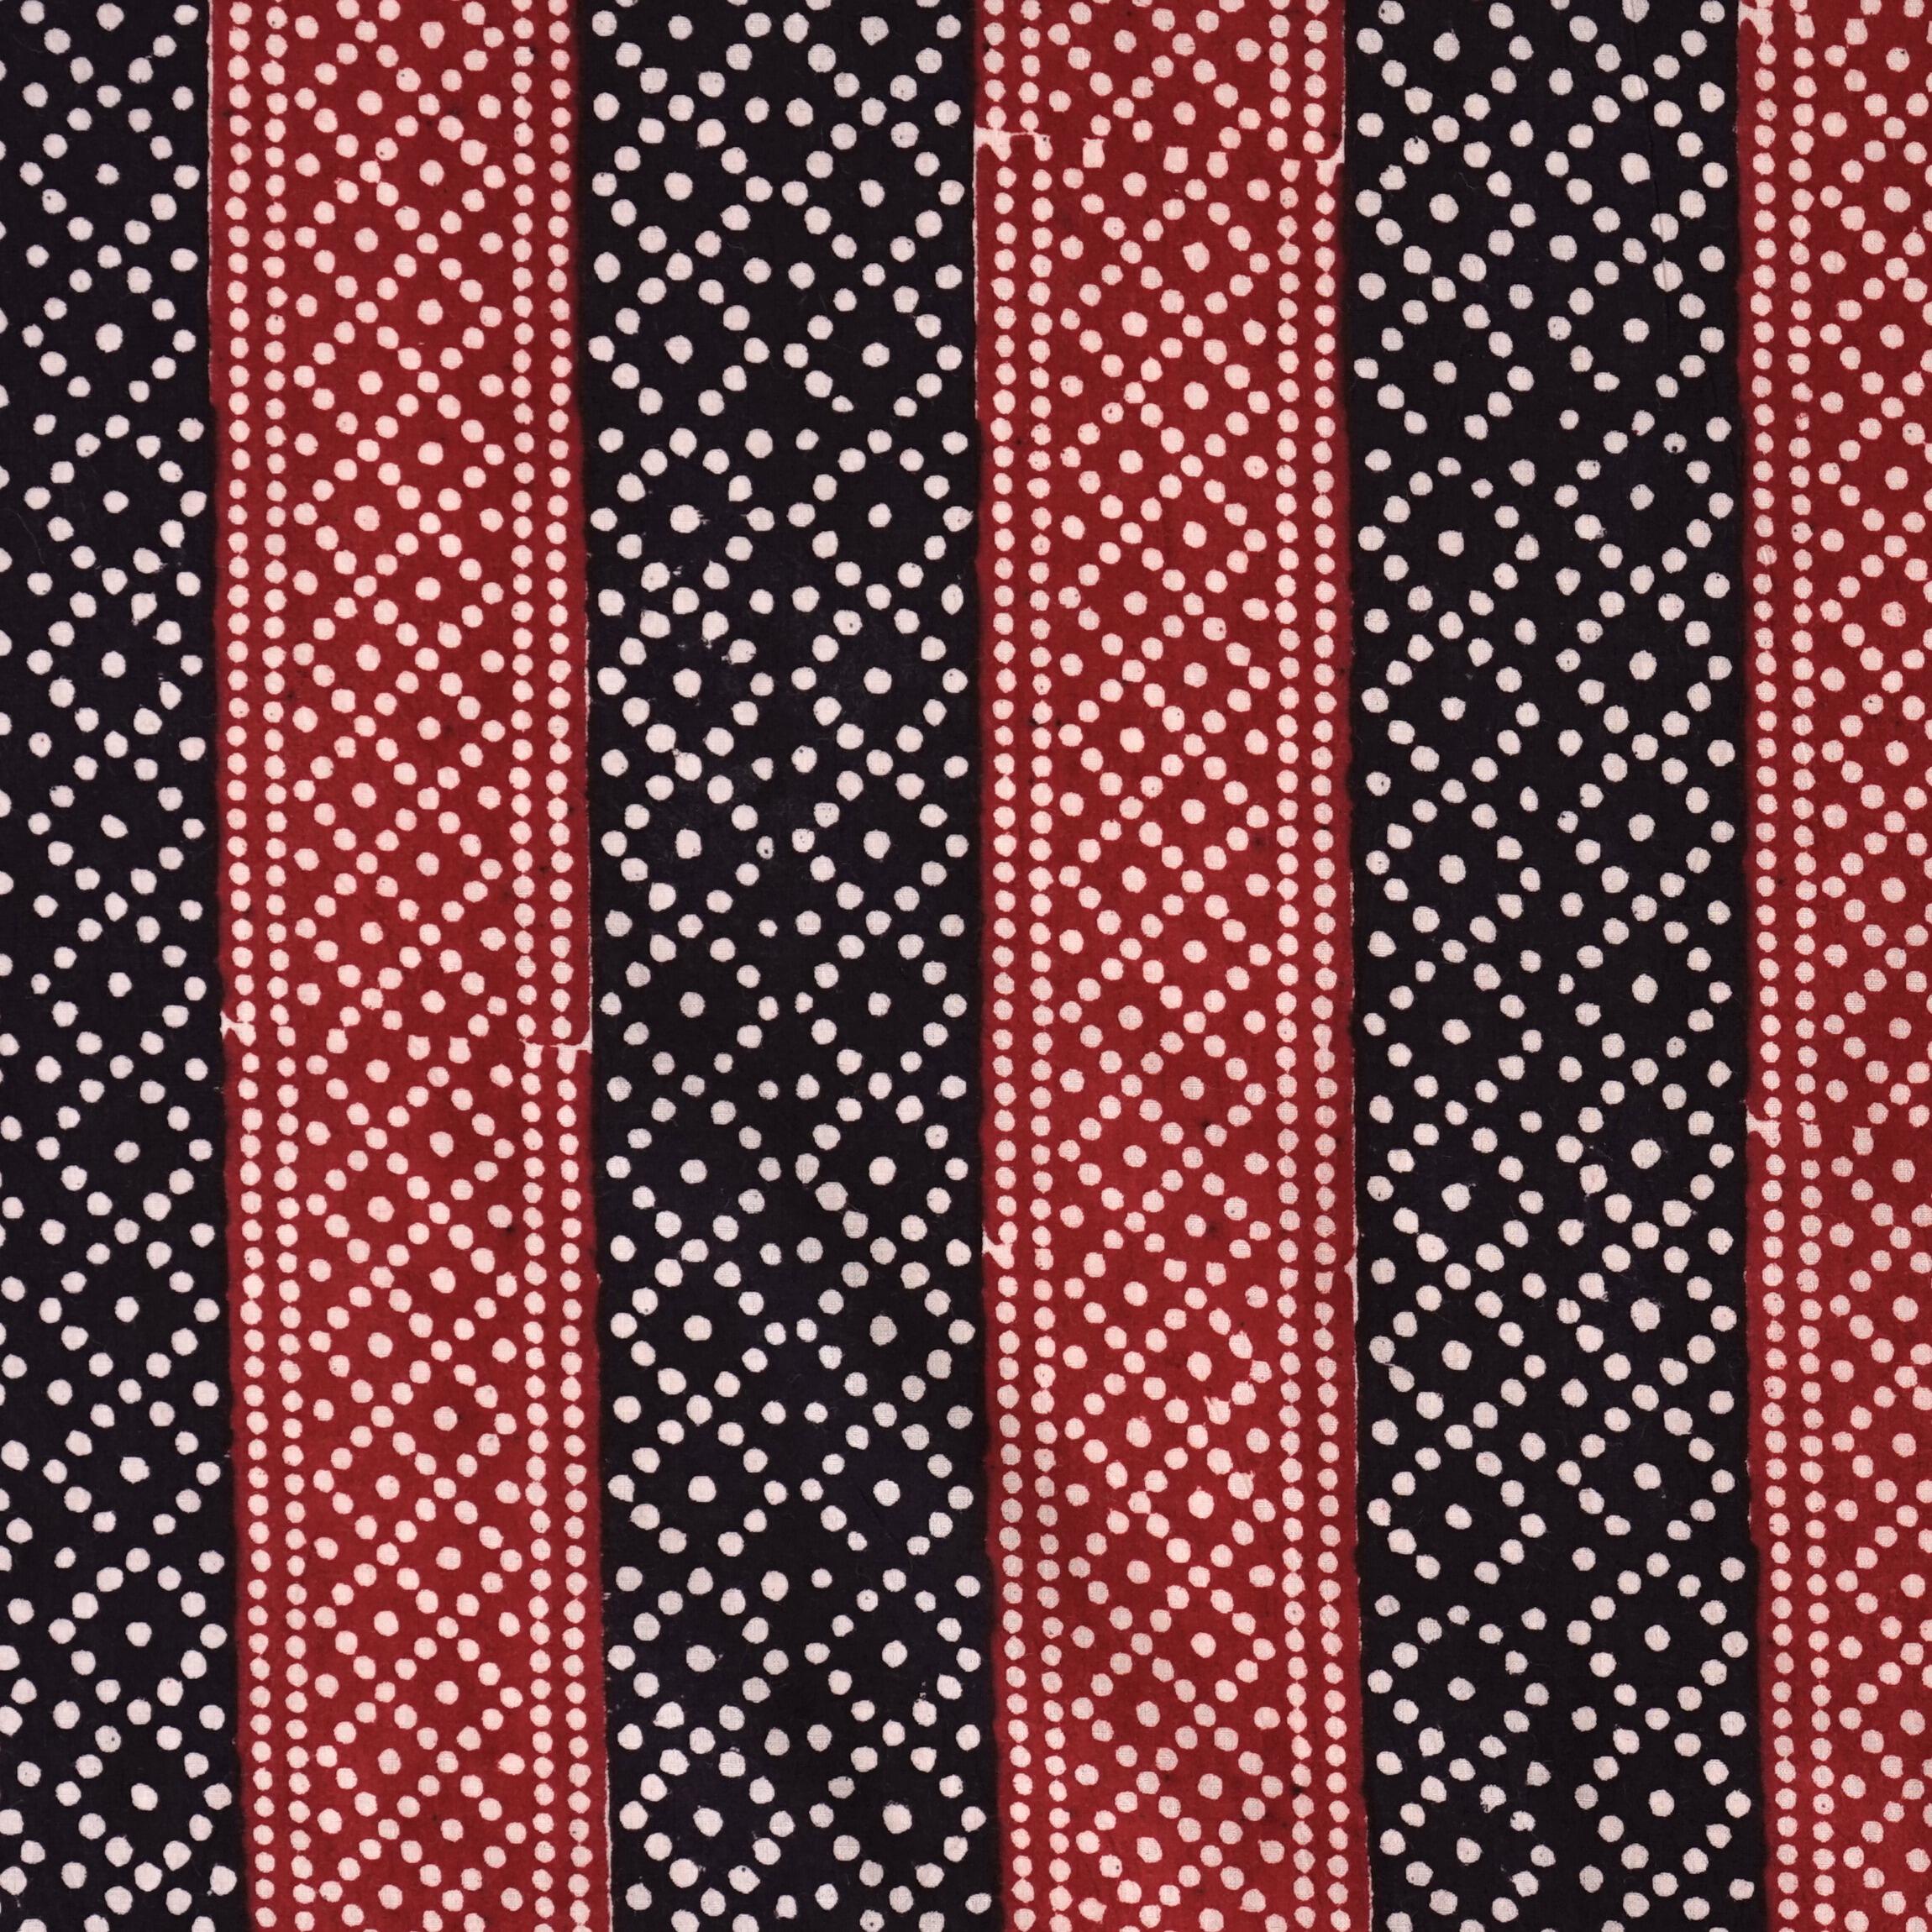 100% Block-Printed Cotton Fabric From India - Pixels Design - Iron Rust Black & Alizarin Red Dyes - Flat